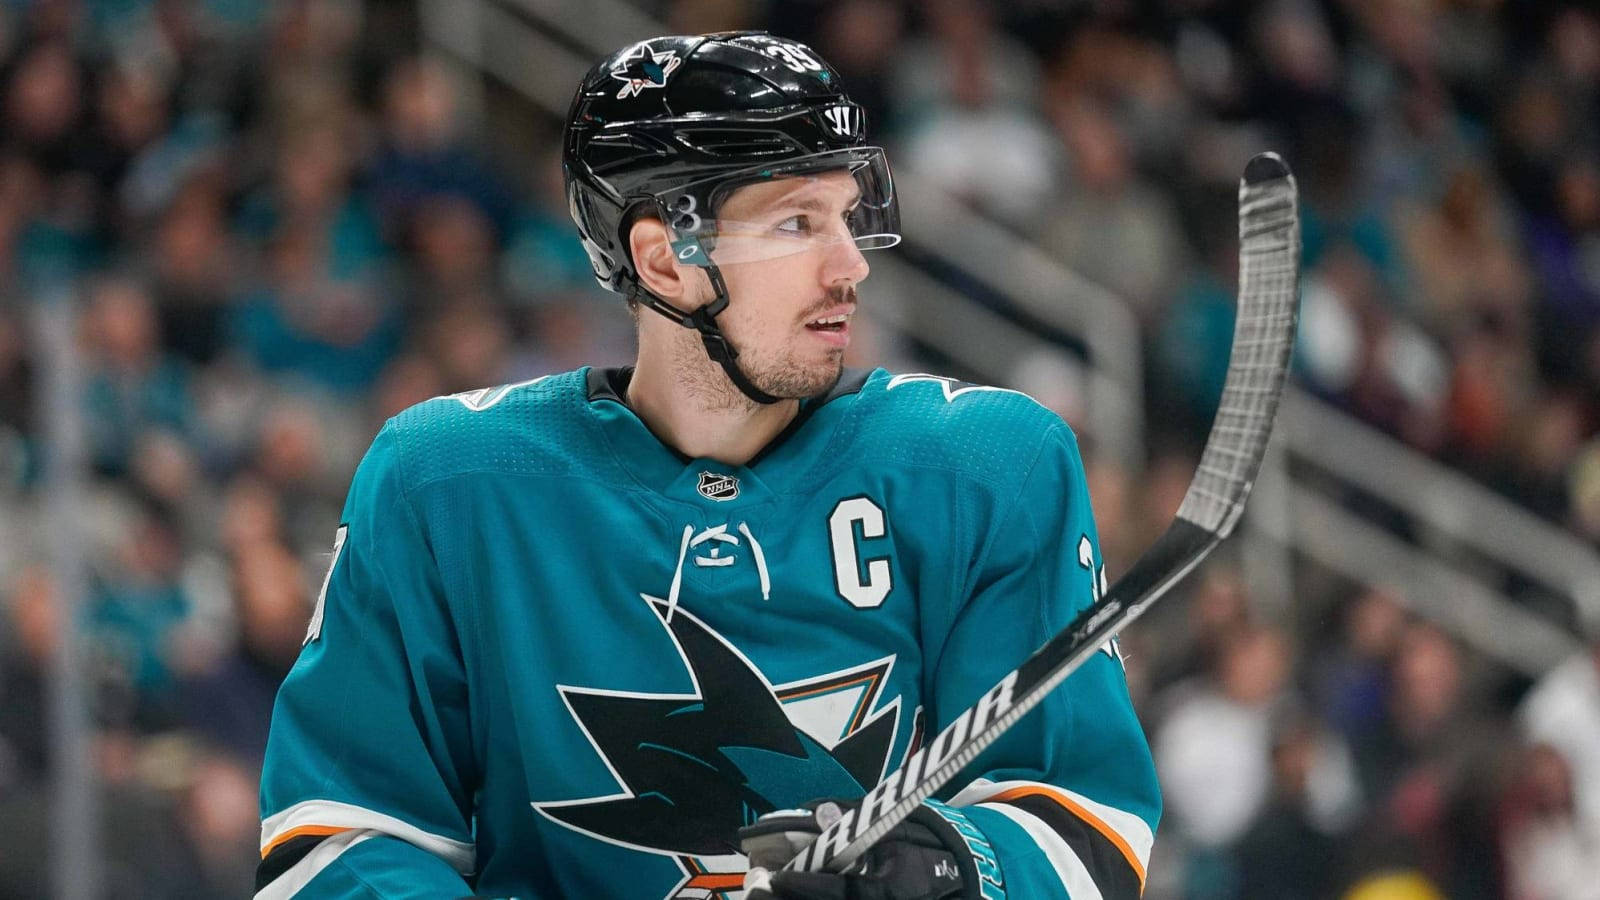 Canadian Ice-hockey Maestro Logan Couture In Action